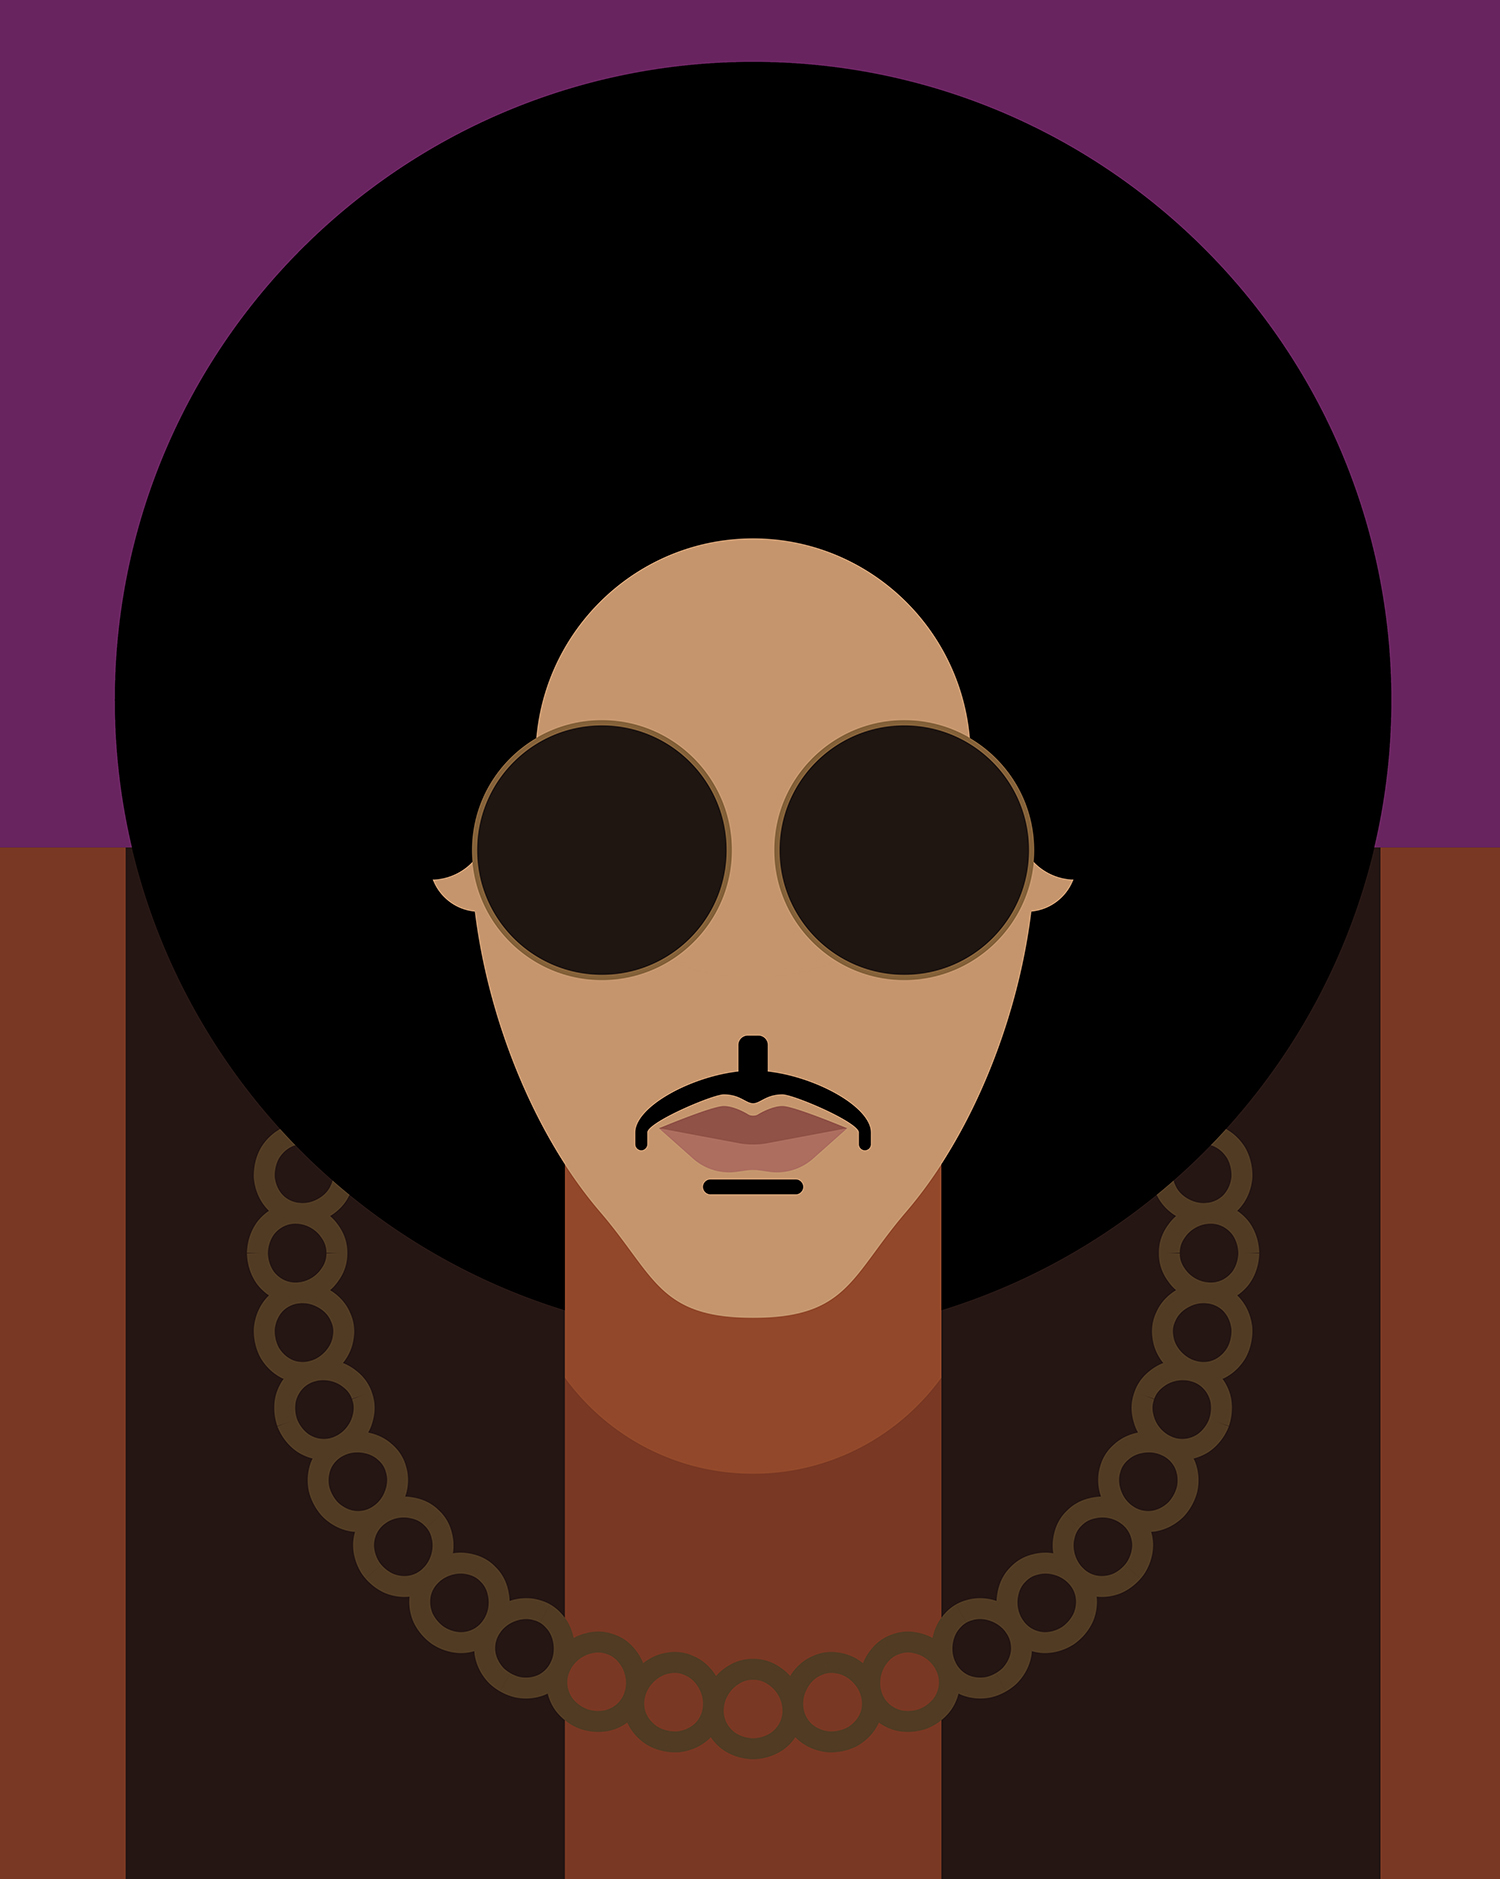 Prince Has Recorded a Song About Baltimore